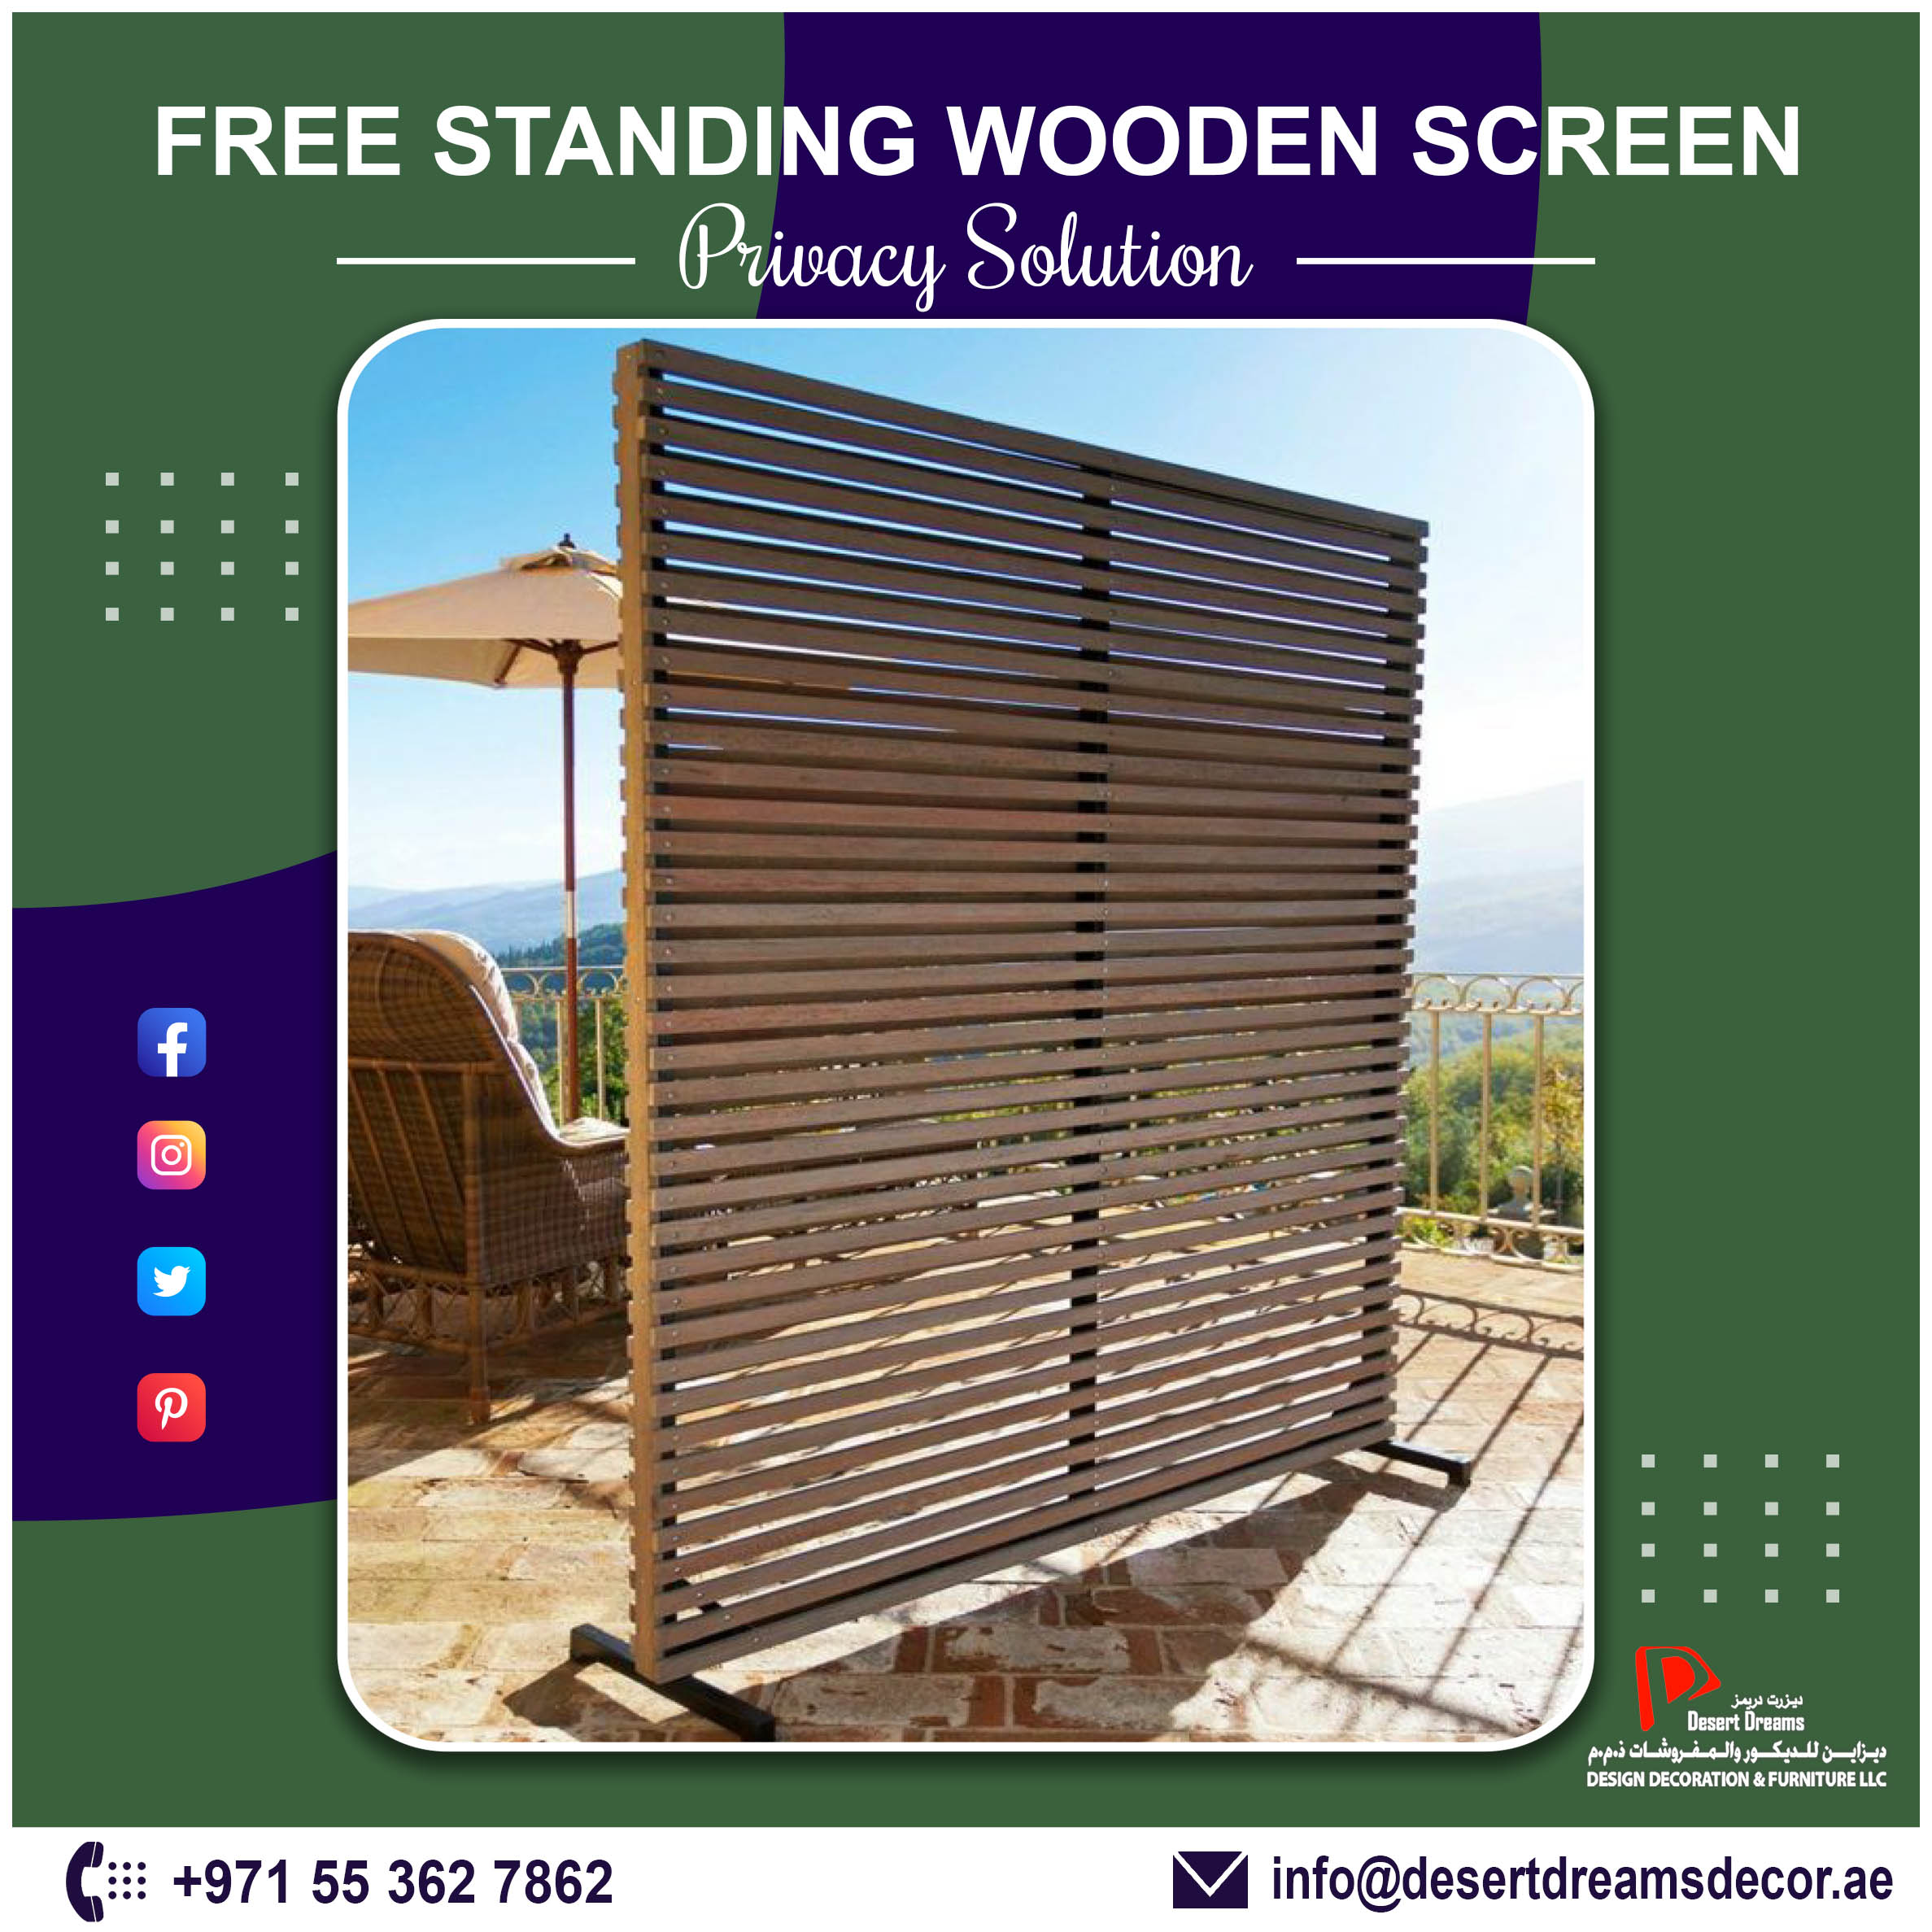 Free Standing Wooden Screen Suppliers in Uae | Natural Wood Fence